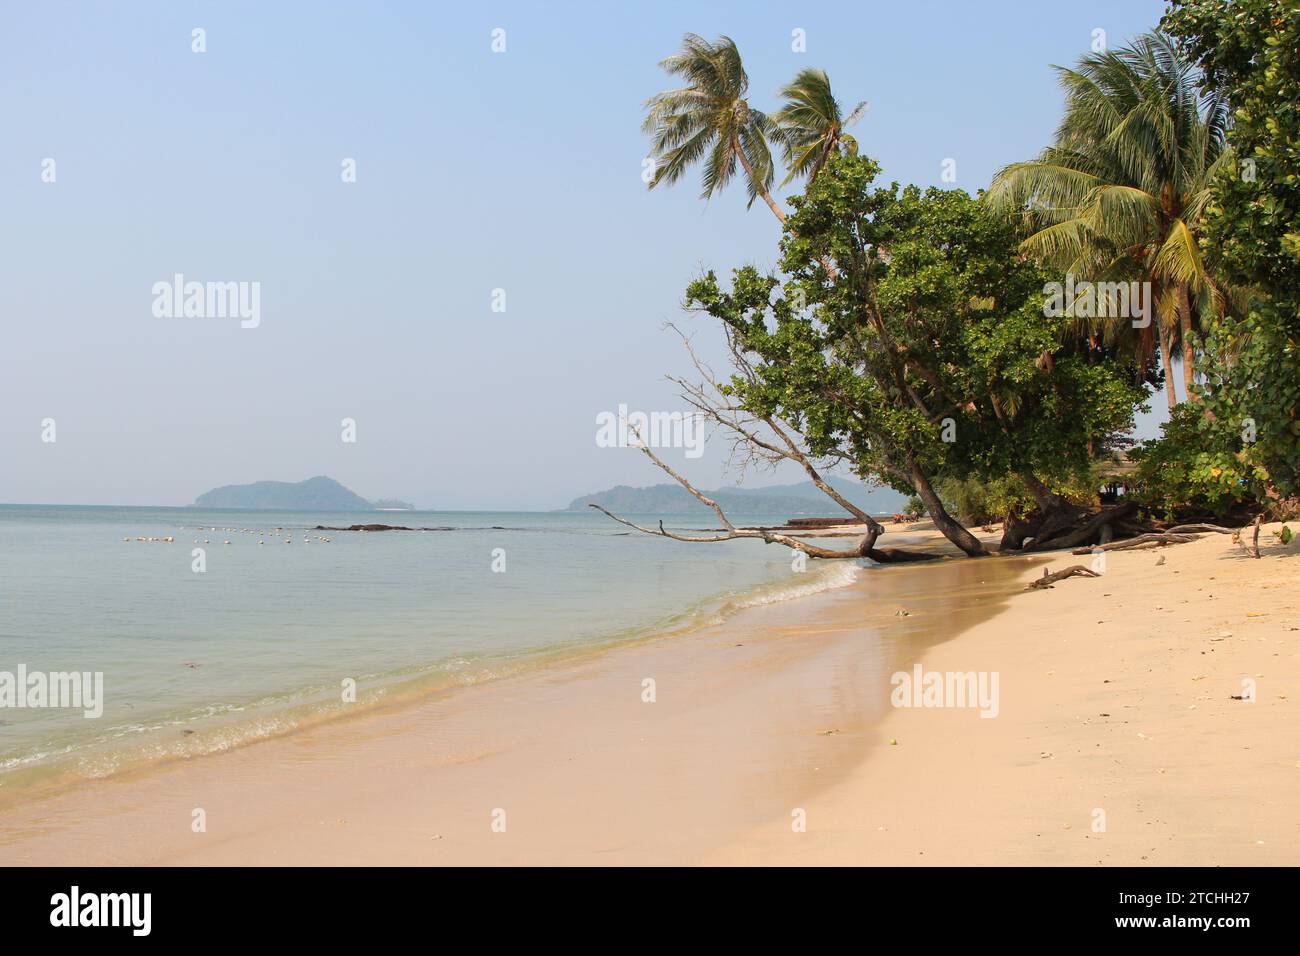 A stunning view of a sandy beach with a beautiful tree-lined shoreline. Stock Photo